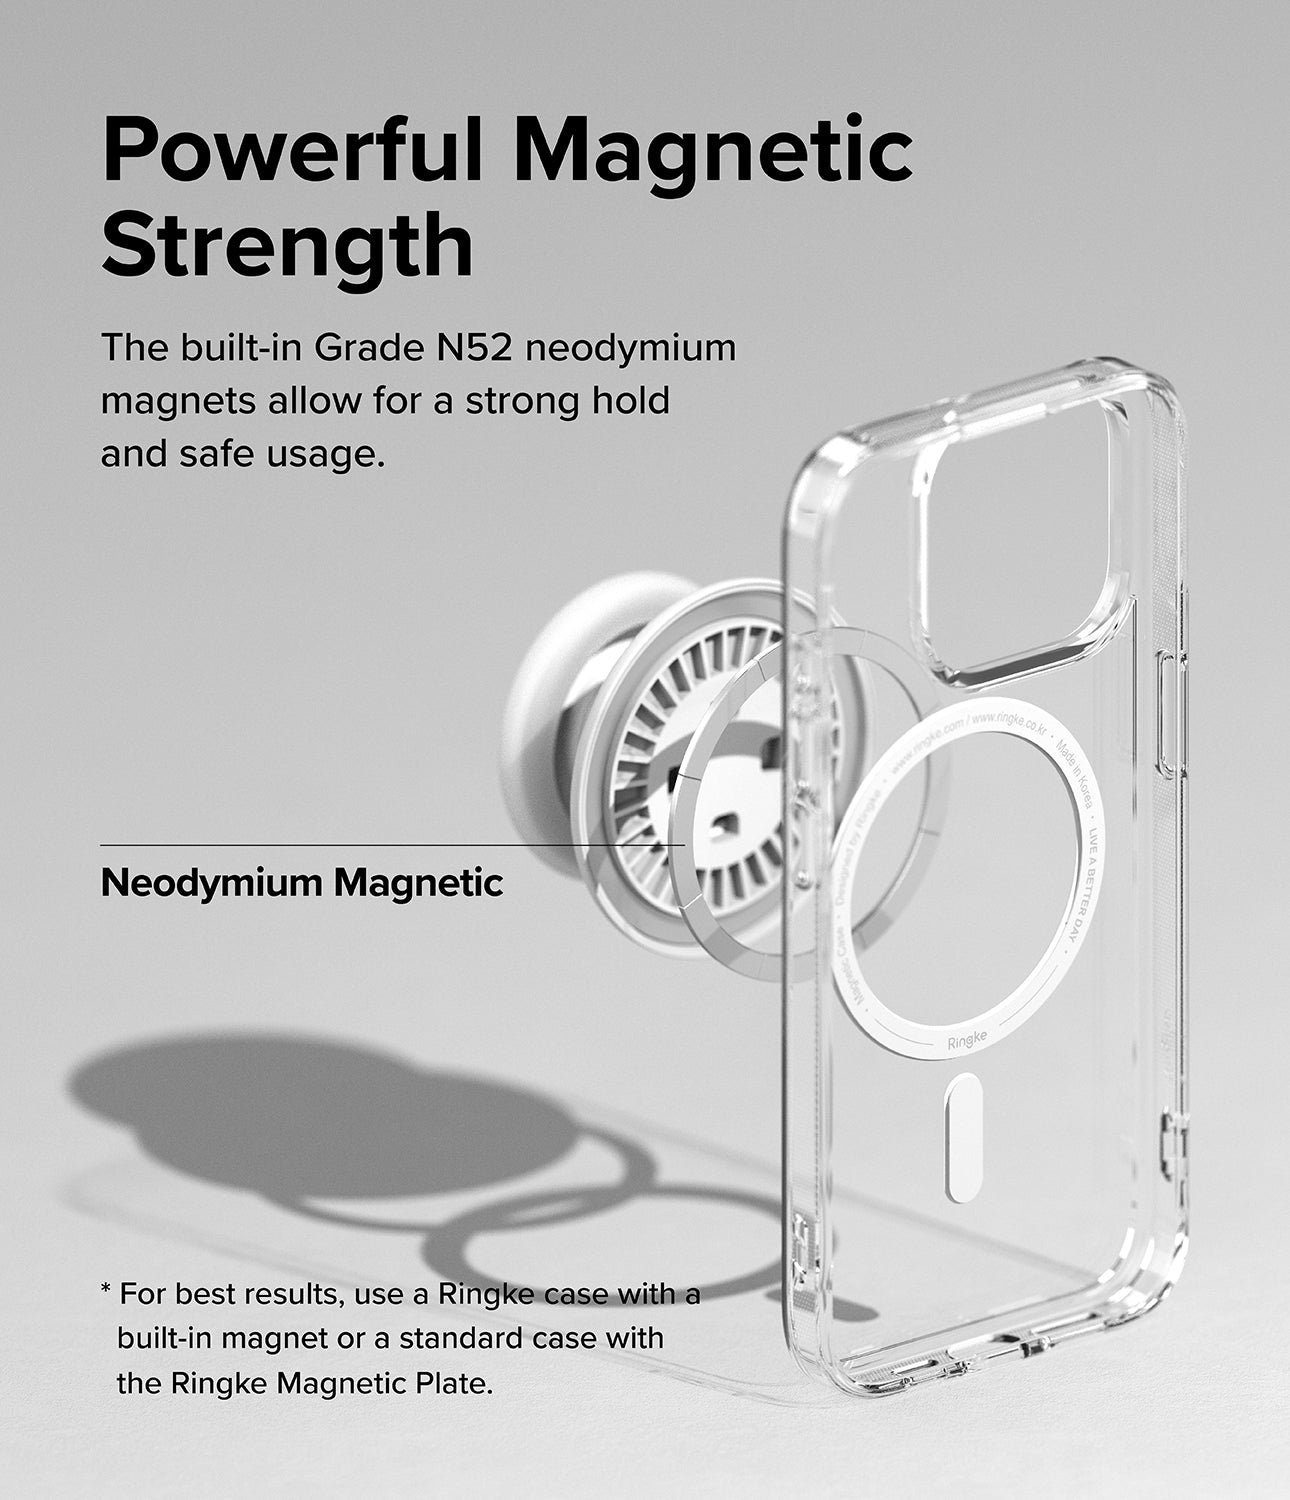 Ringke Tok Magnetic - Powerful Magnetic Strength. The built-in Grade N52 neodymium magnets allow for a strong hold and safe usage.